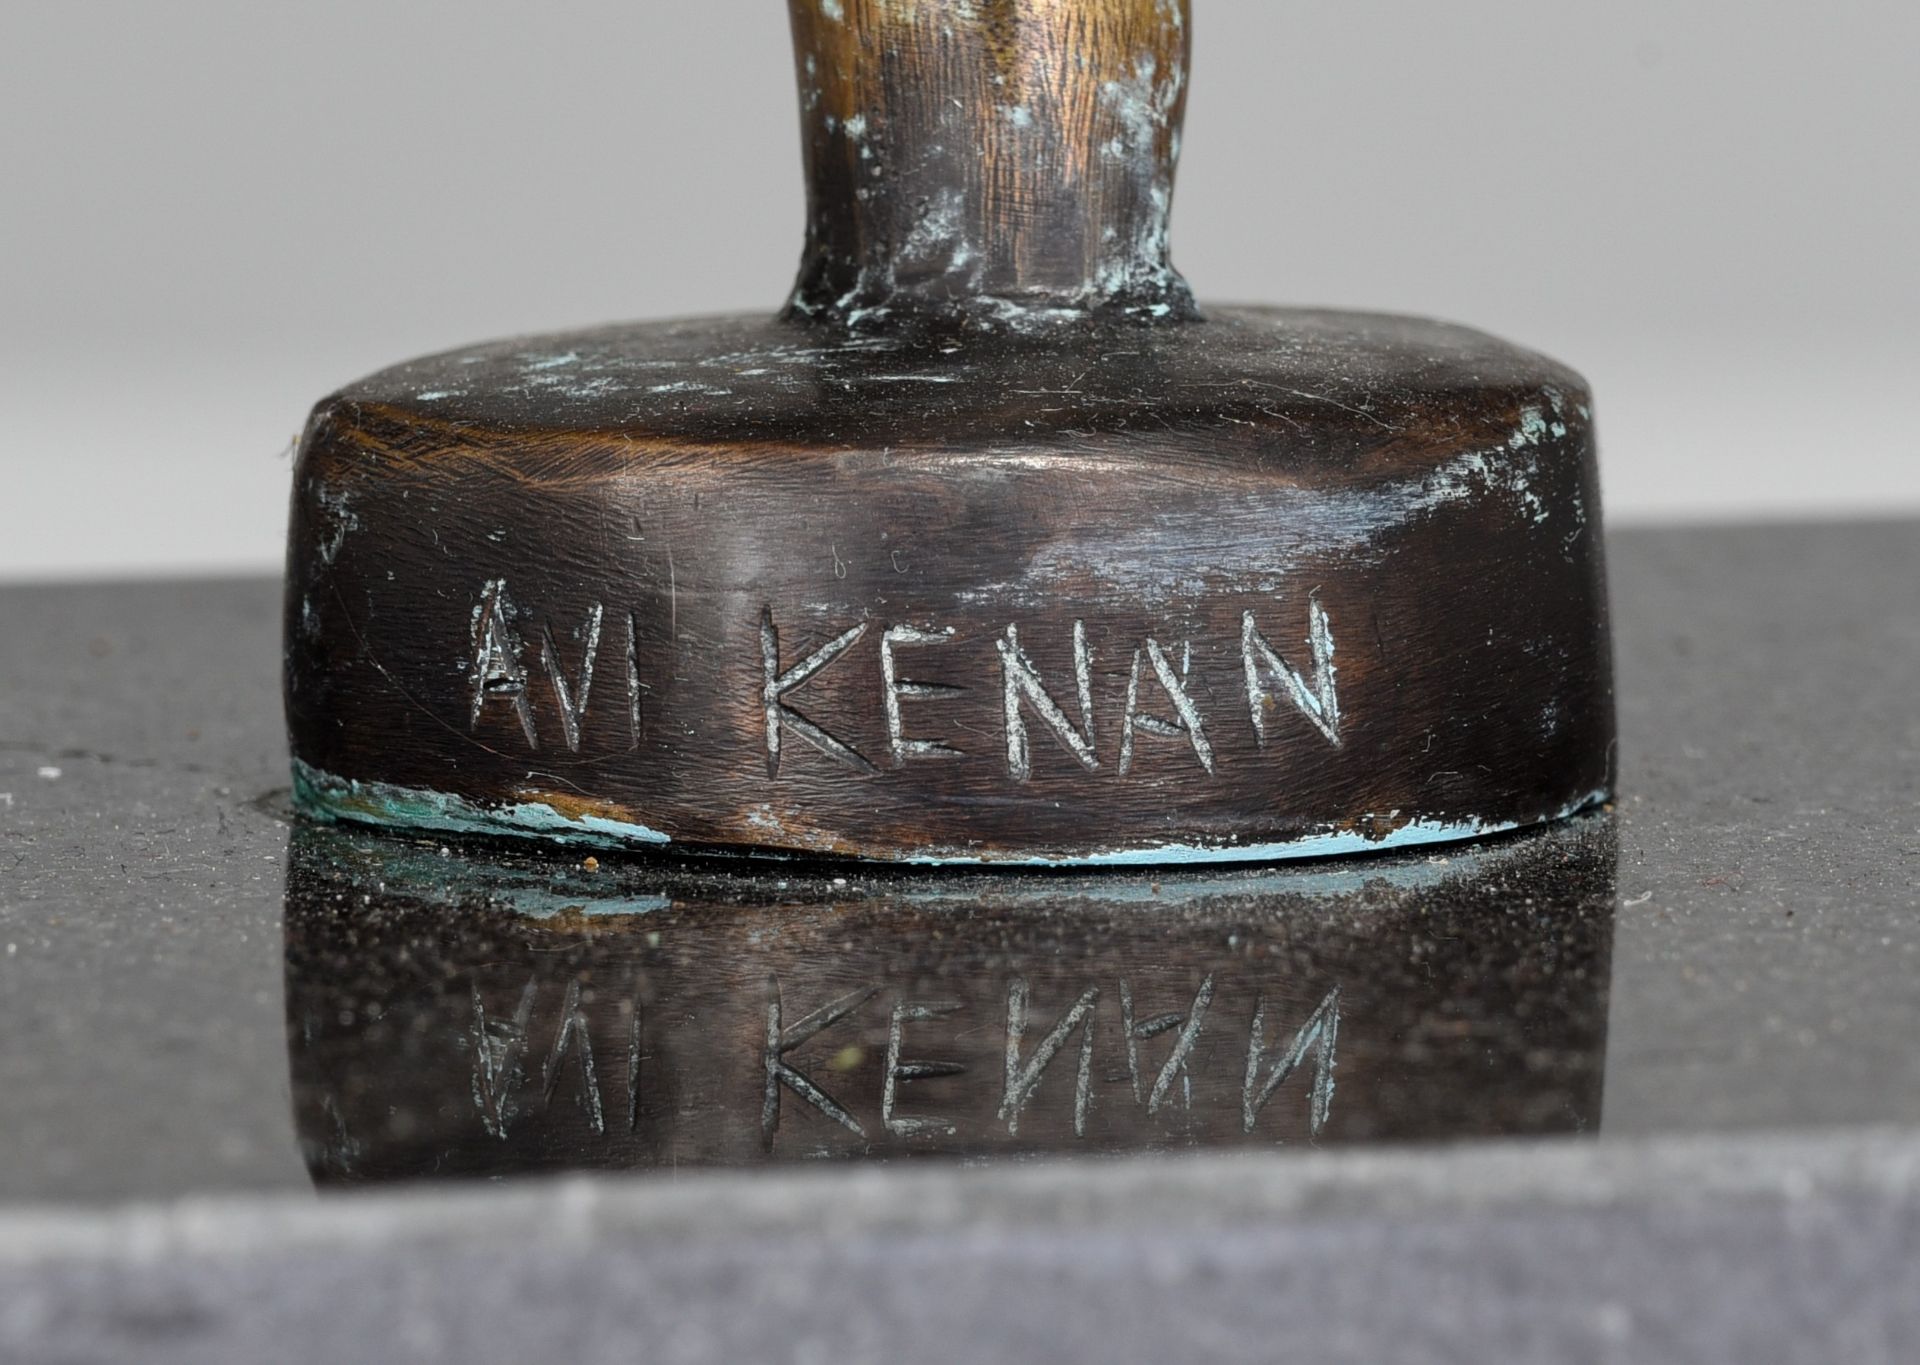 Avi Kenan (1951), untitled, 1983, N∞ 5/50, patinated bronze on a granite base, H 54 - 60 cm (without - Image 7 of 7